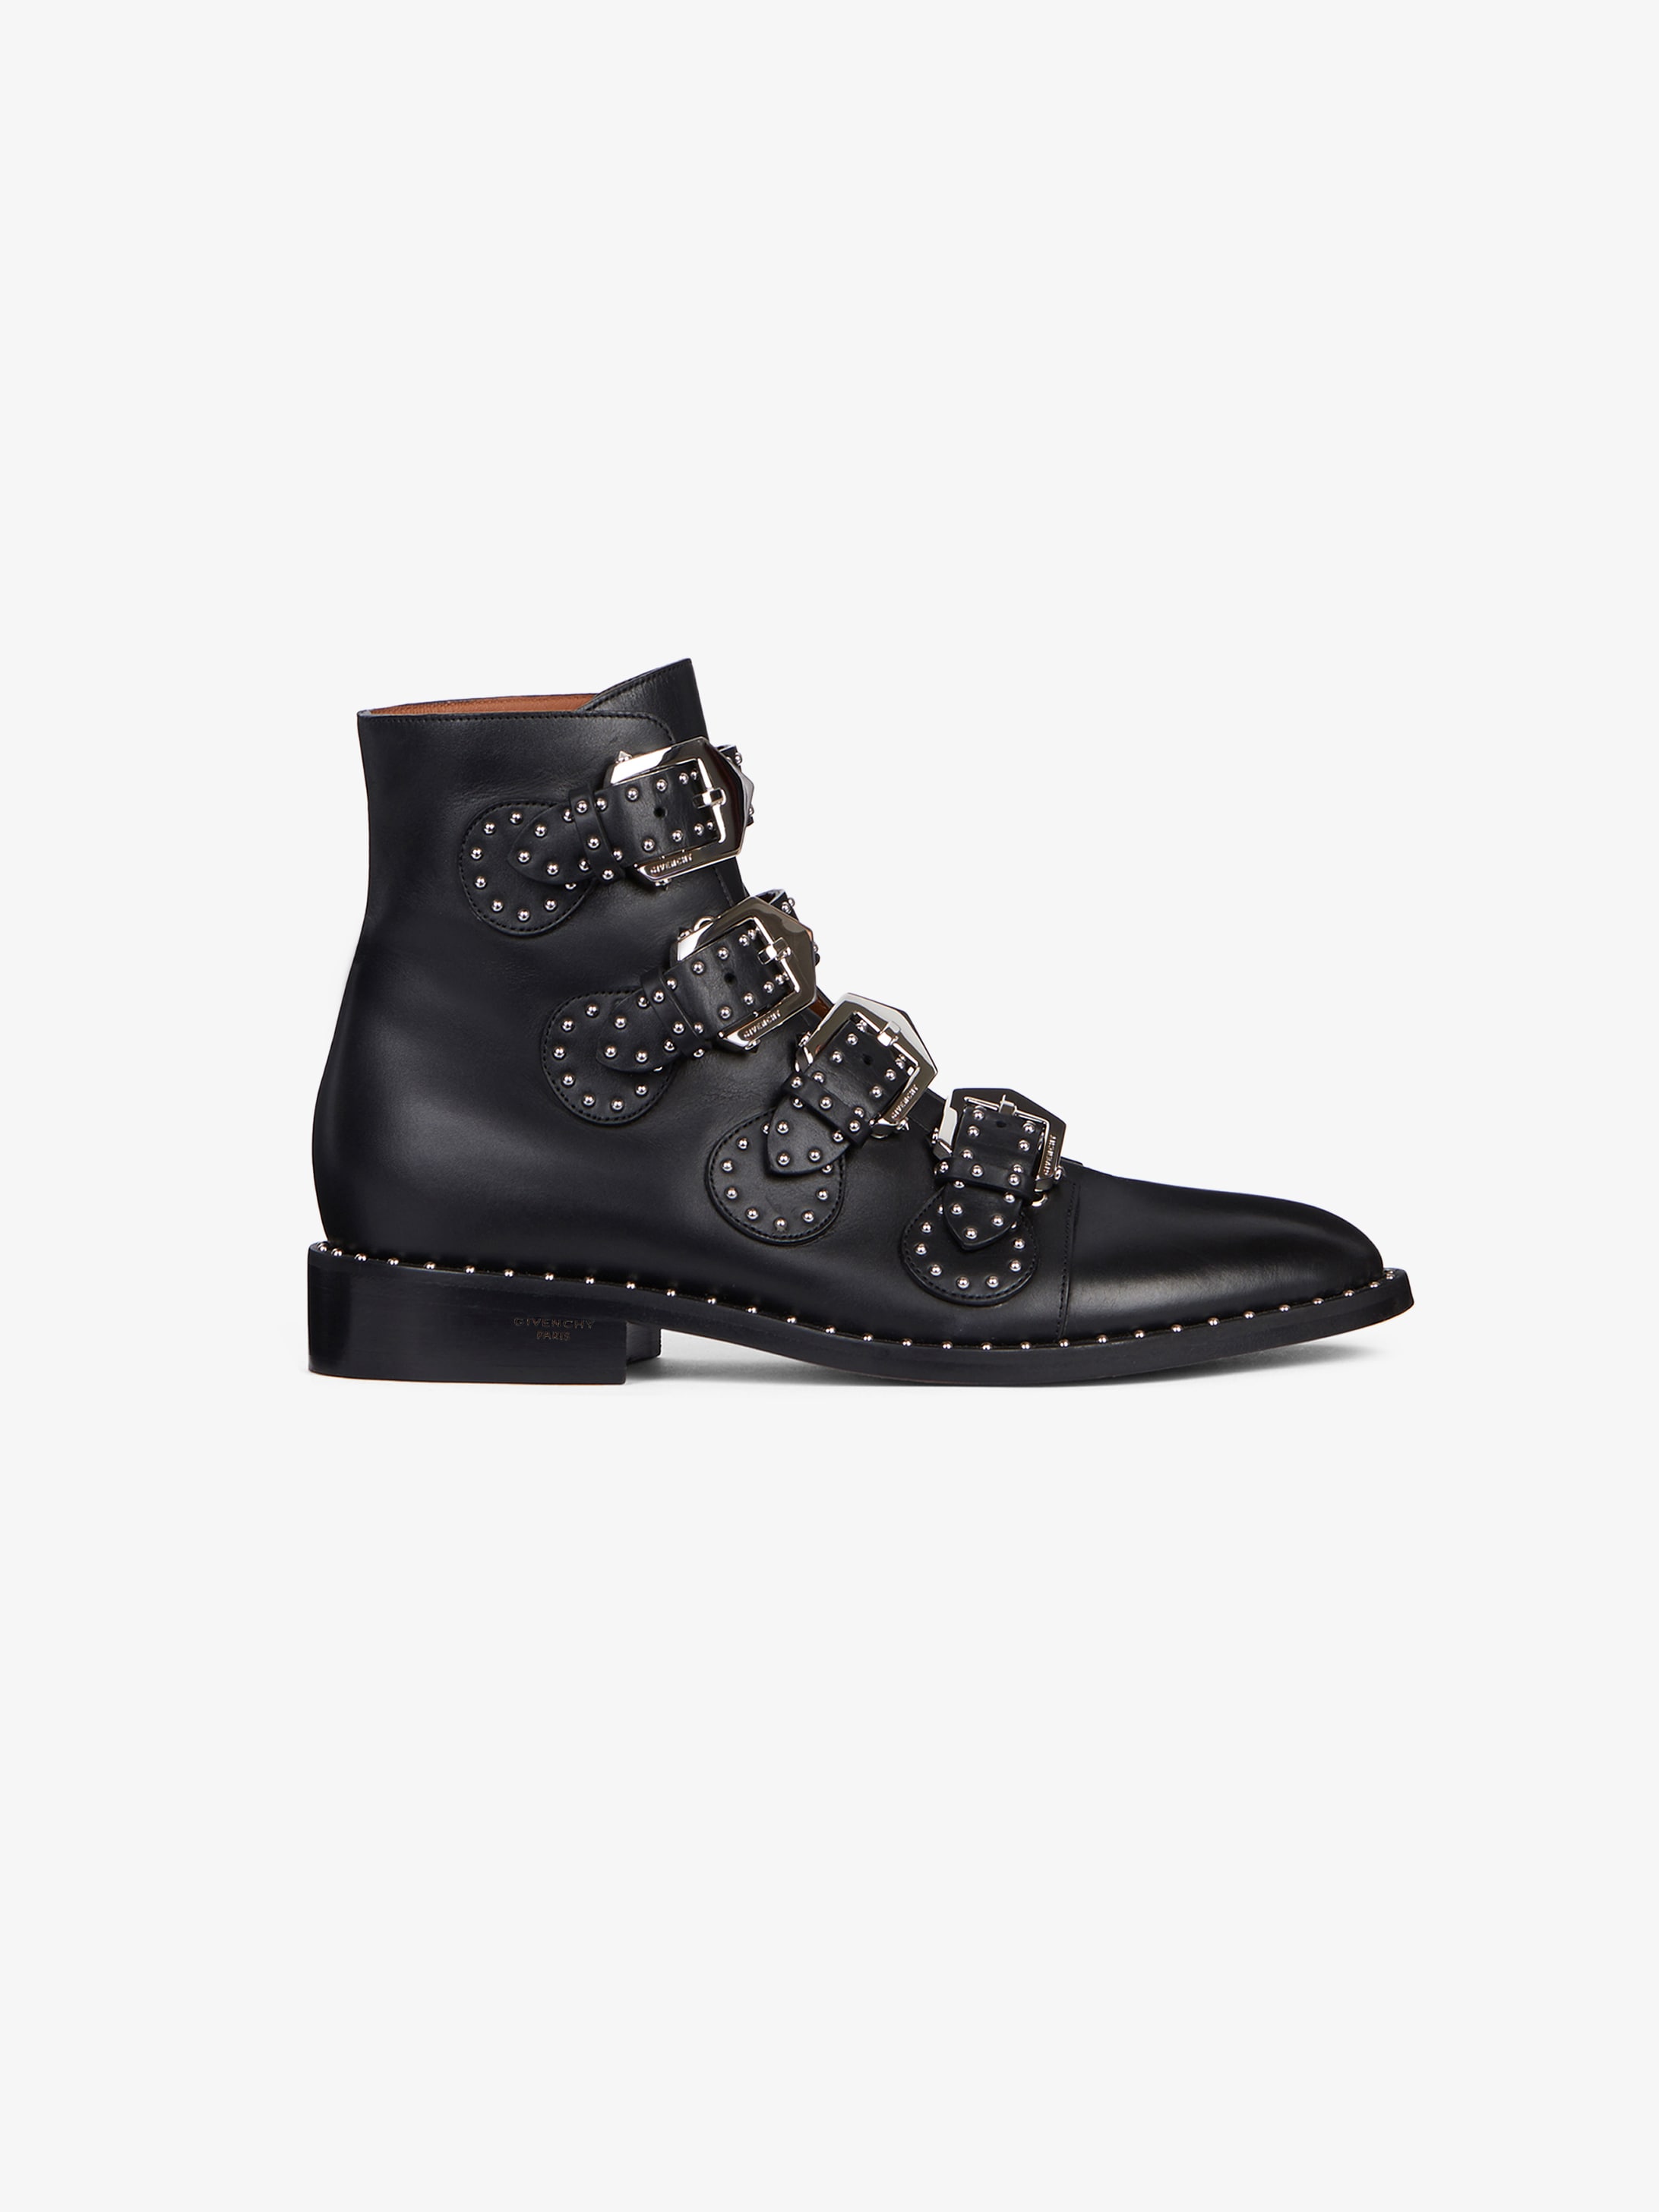 givenchy boots black